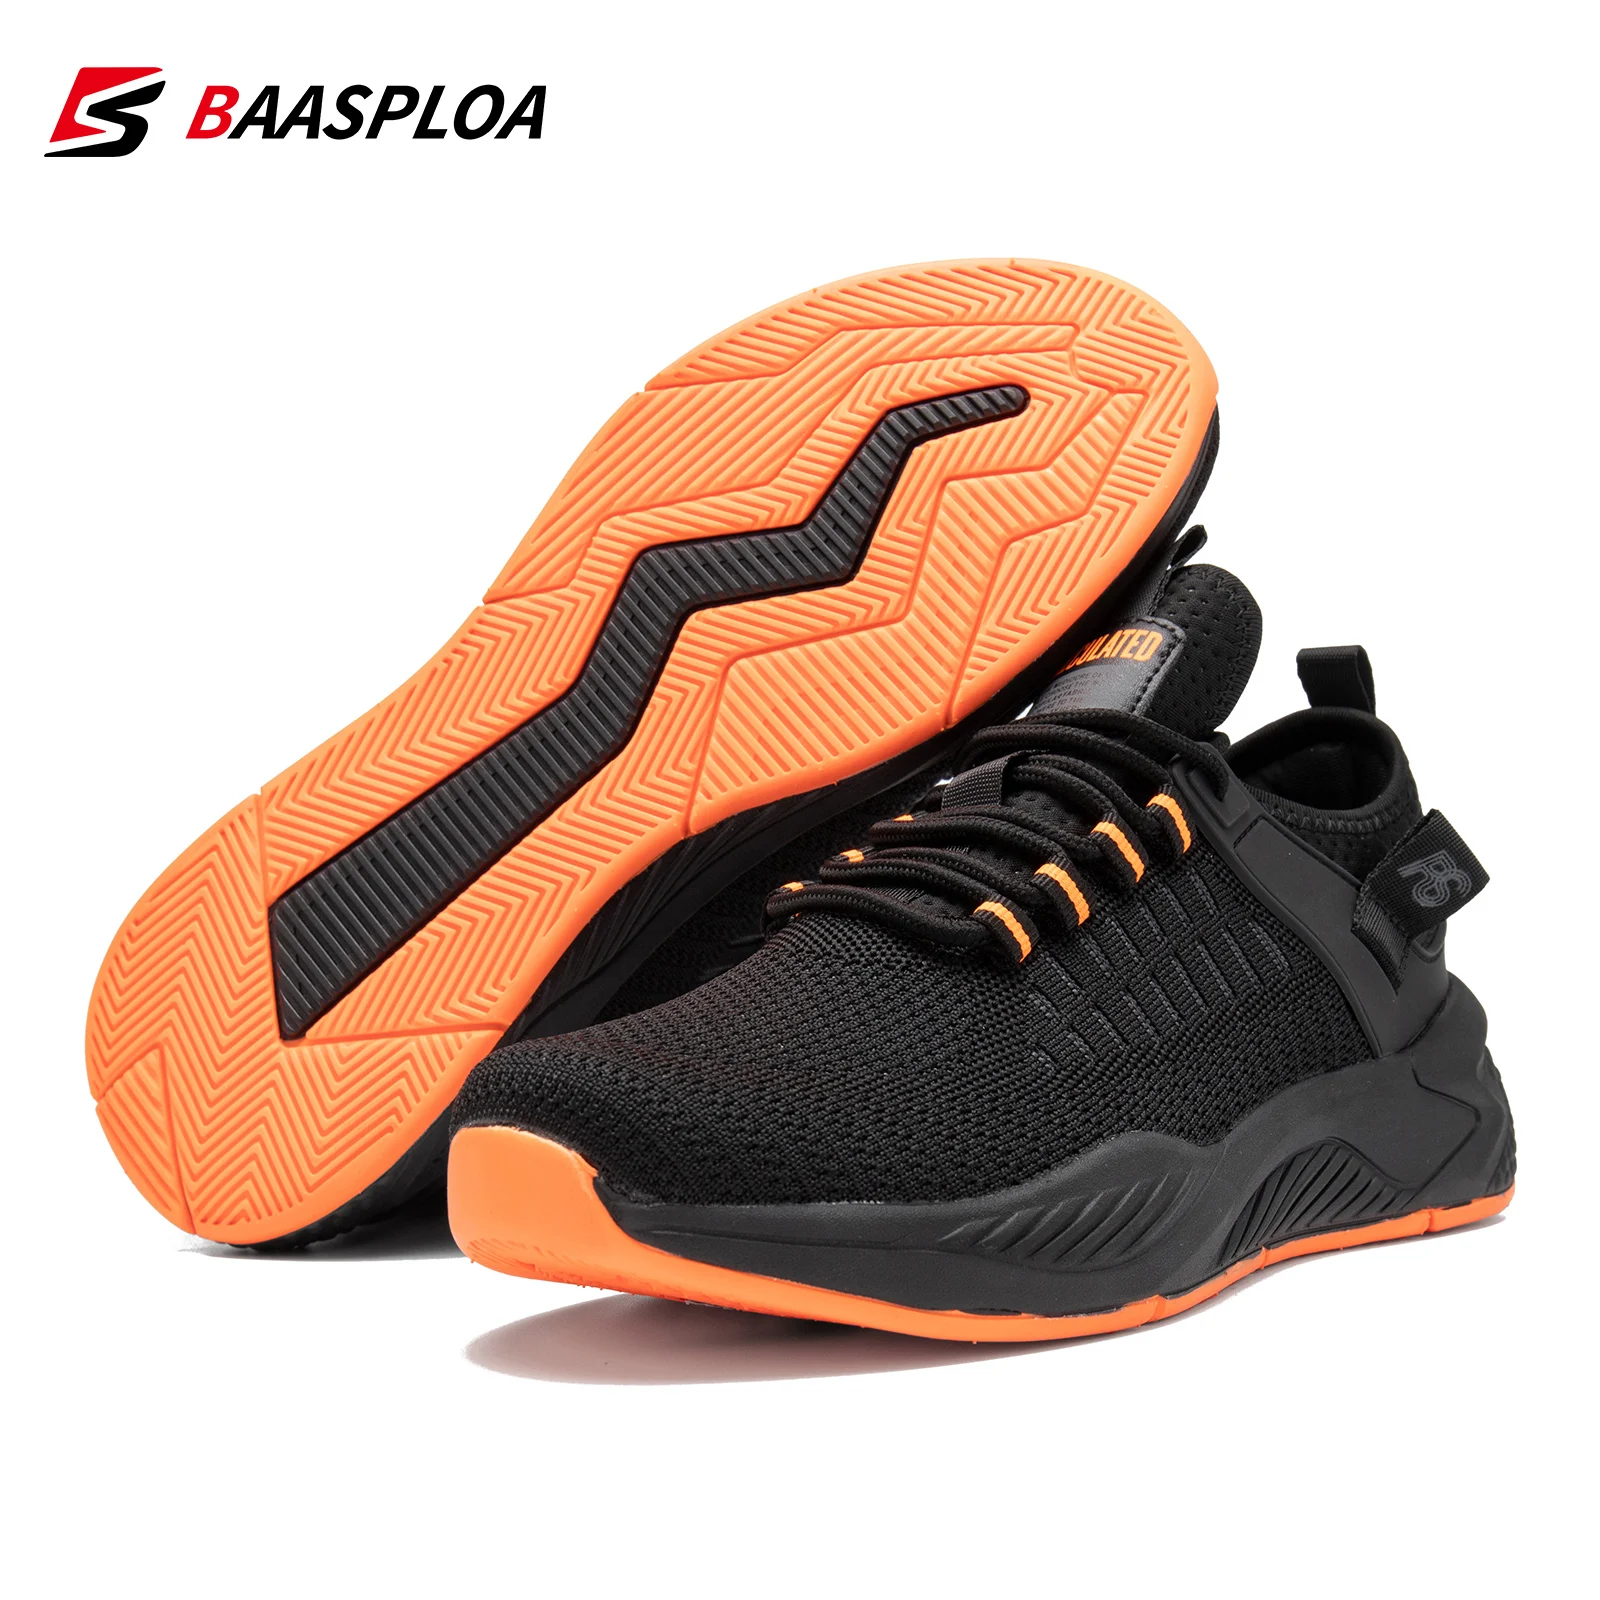 

Baasploa Men Running Shoes Lightweight Breathable Casual Sneakers for Men Wear-Resistant Casual Male Non-Slip Tennis Sport Shoes